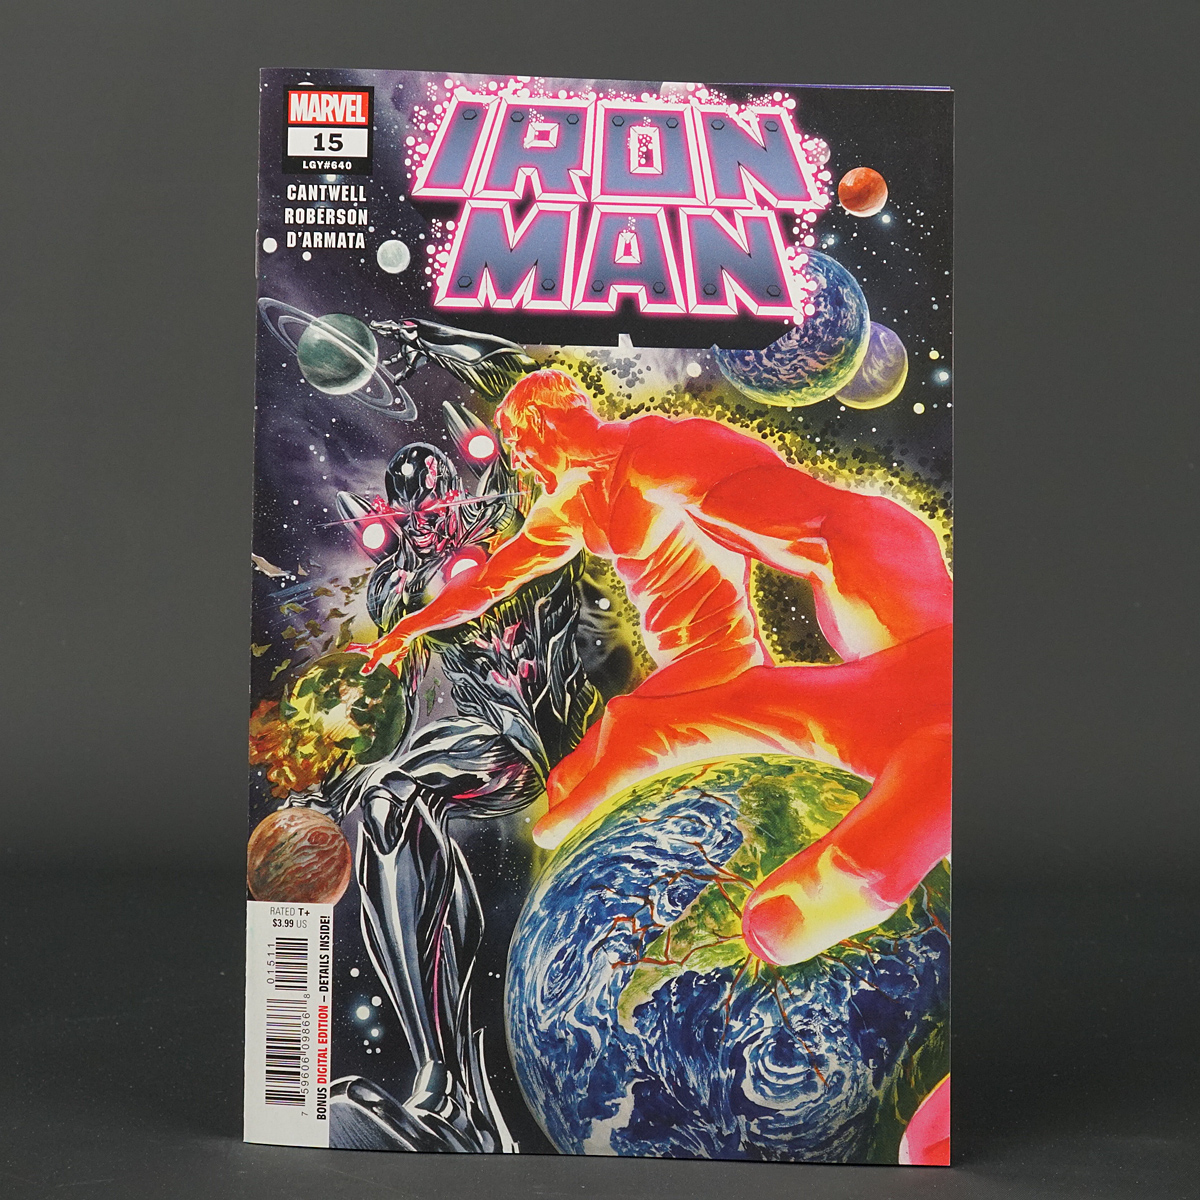 IRON MAN #15 Marvel Comics 2021 OCT210933 (W) Cantwell (A) Roberson (CA) Ross